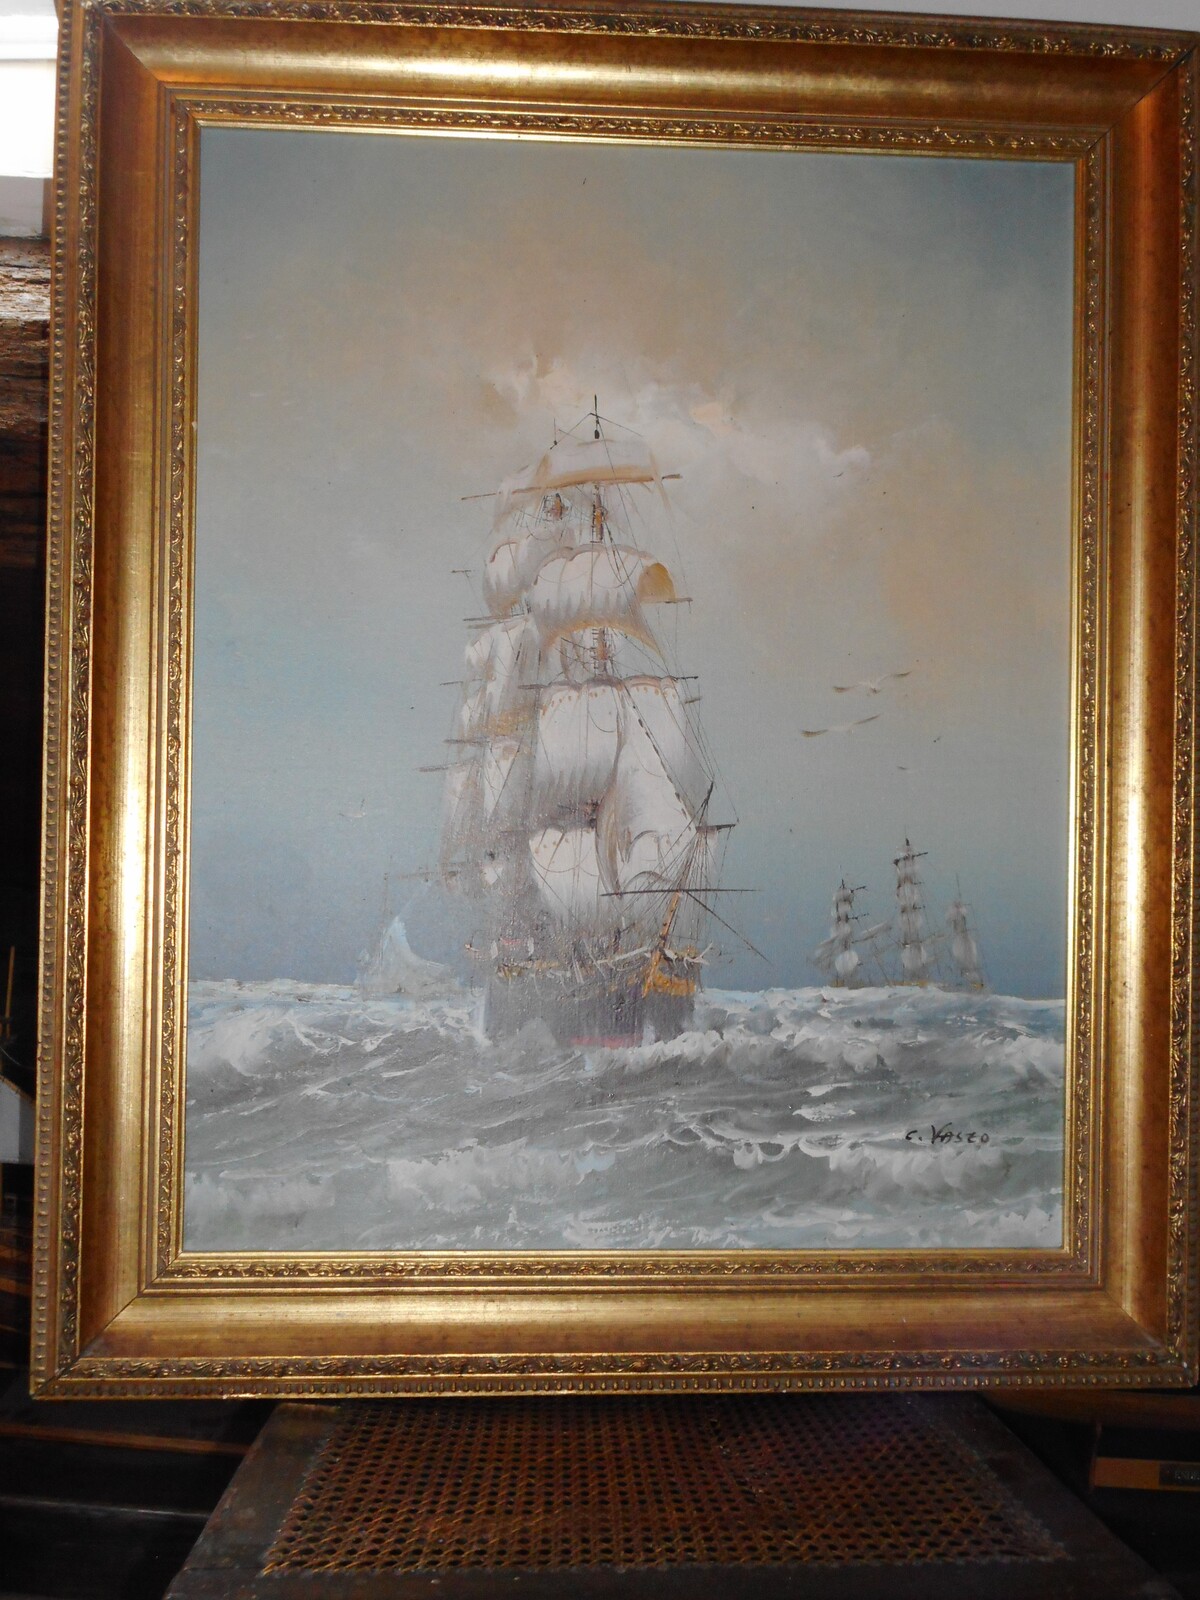 Oil Painting Of A Sailing Ship By  C Vasco